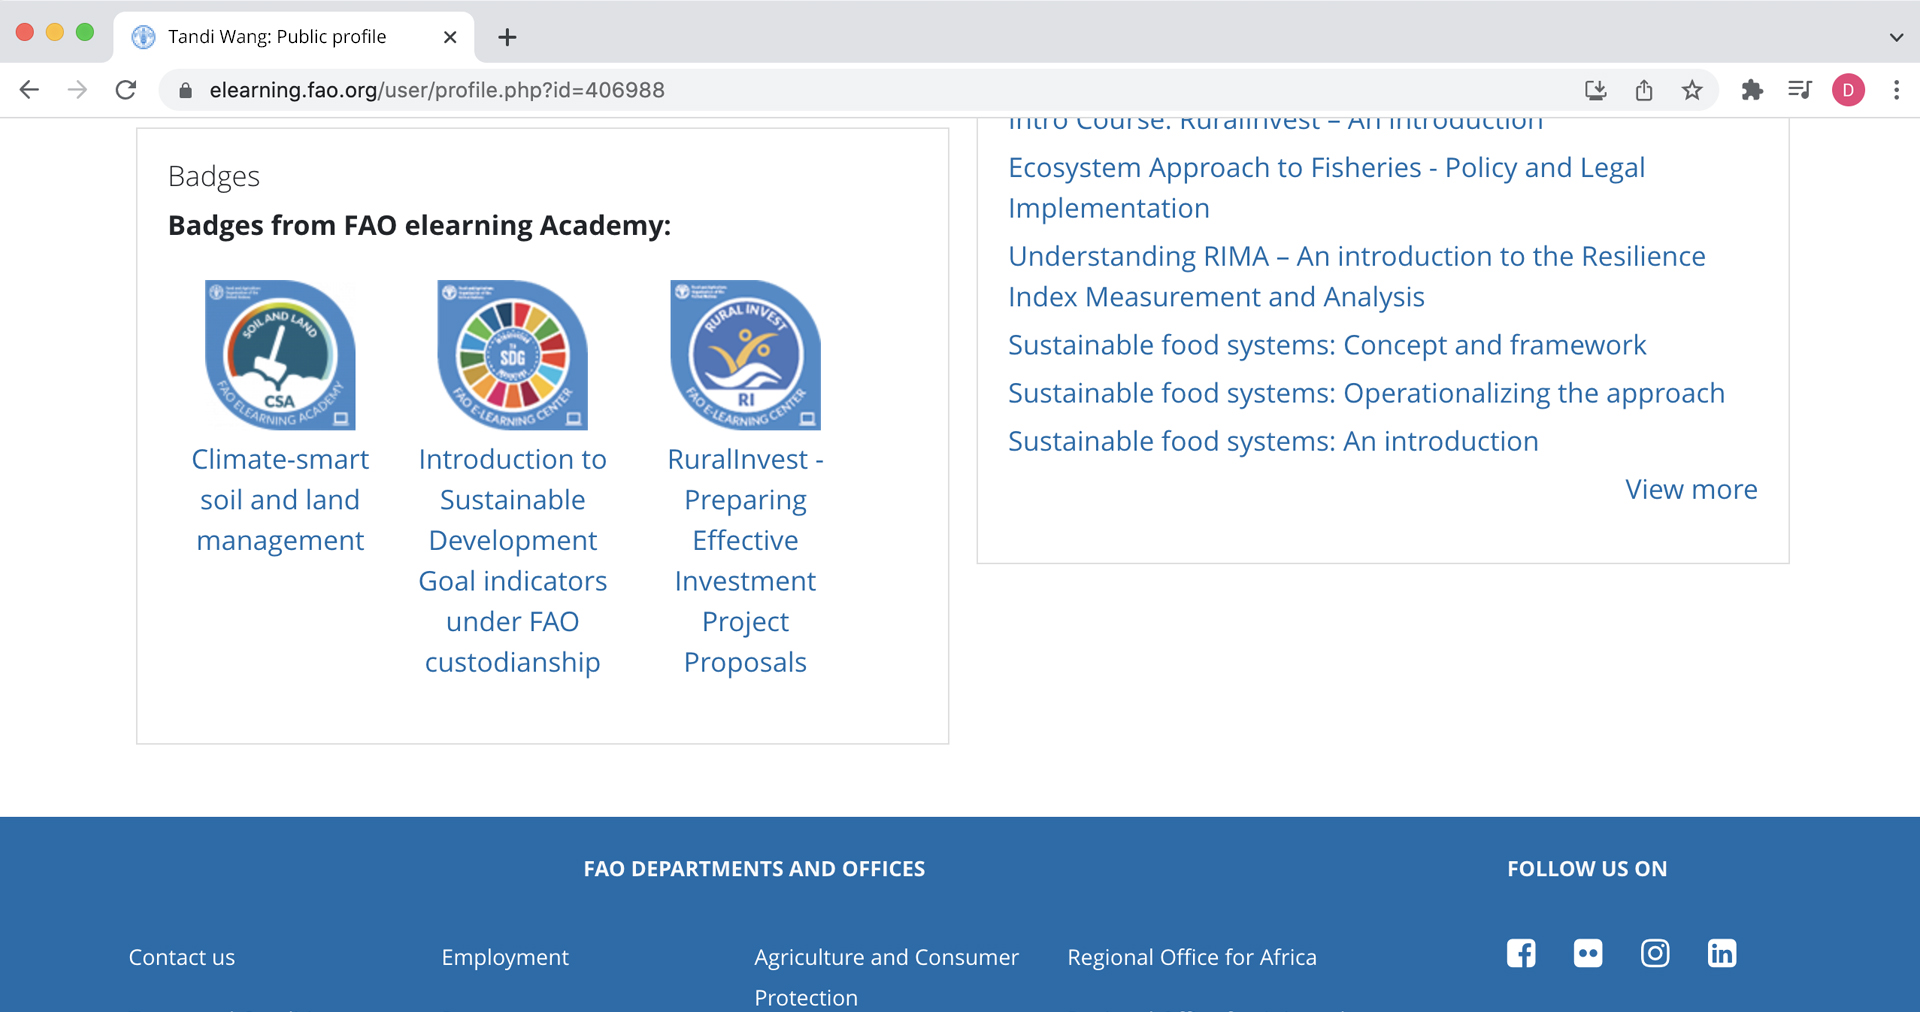 FAO elearning Academy: Certification with digital badges